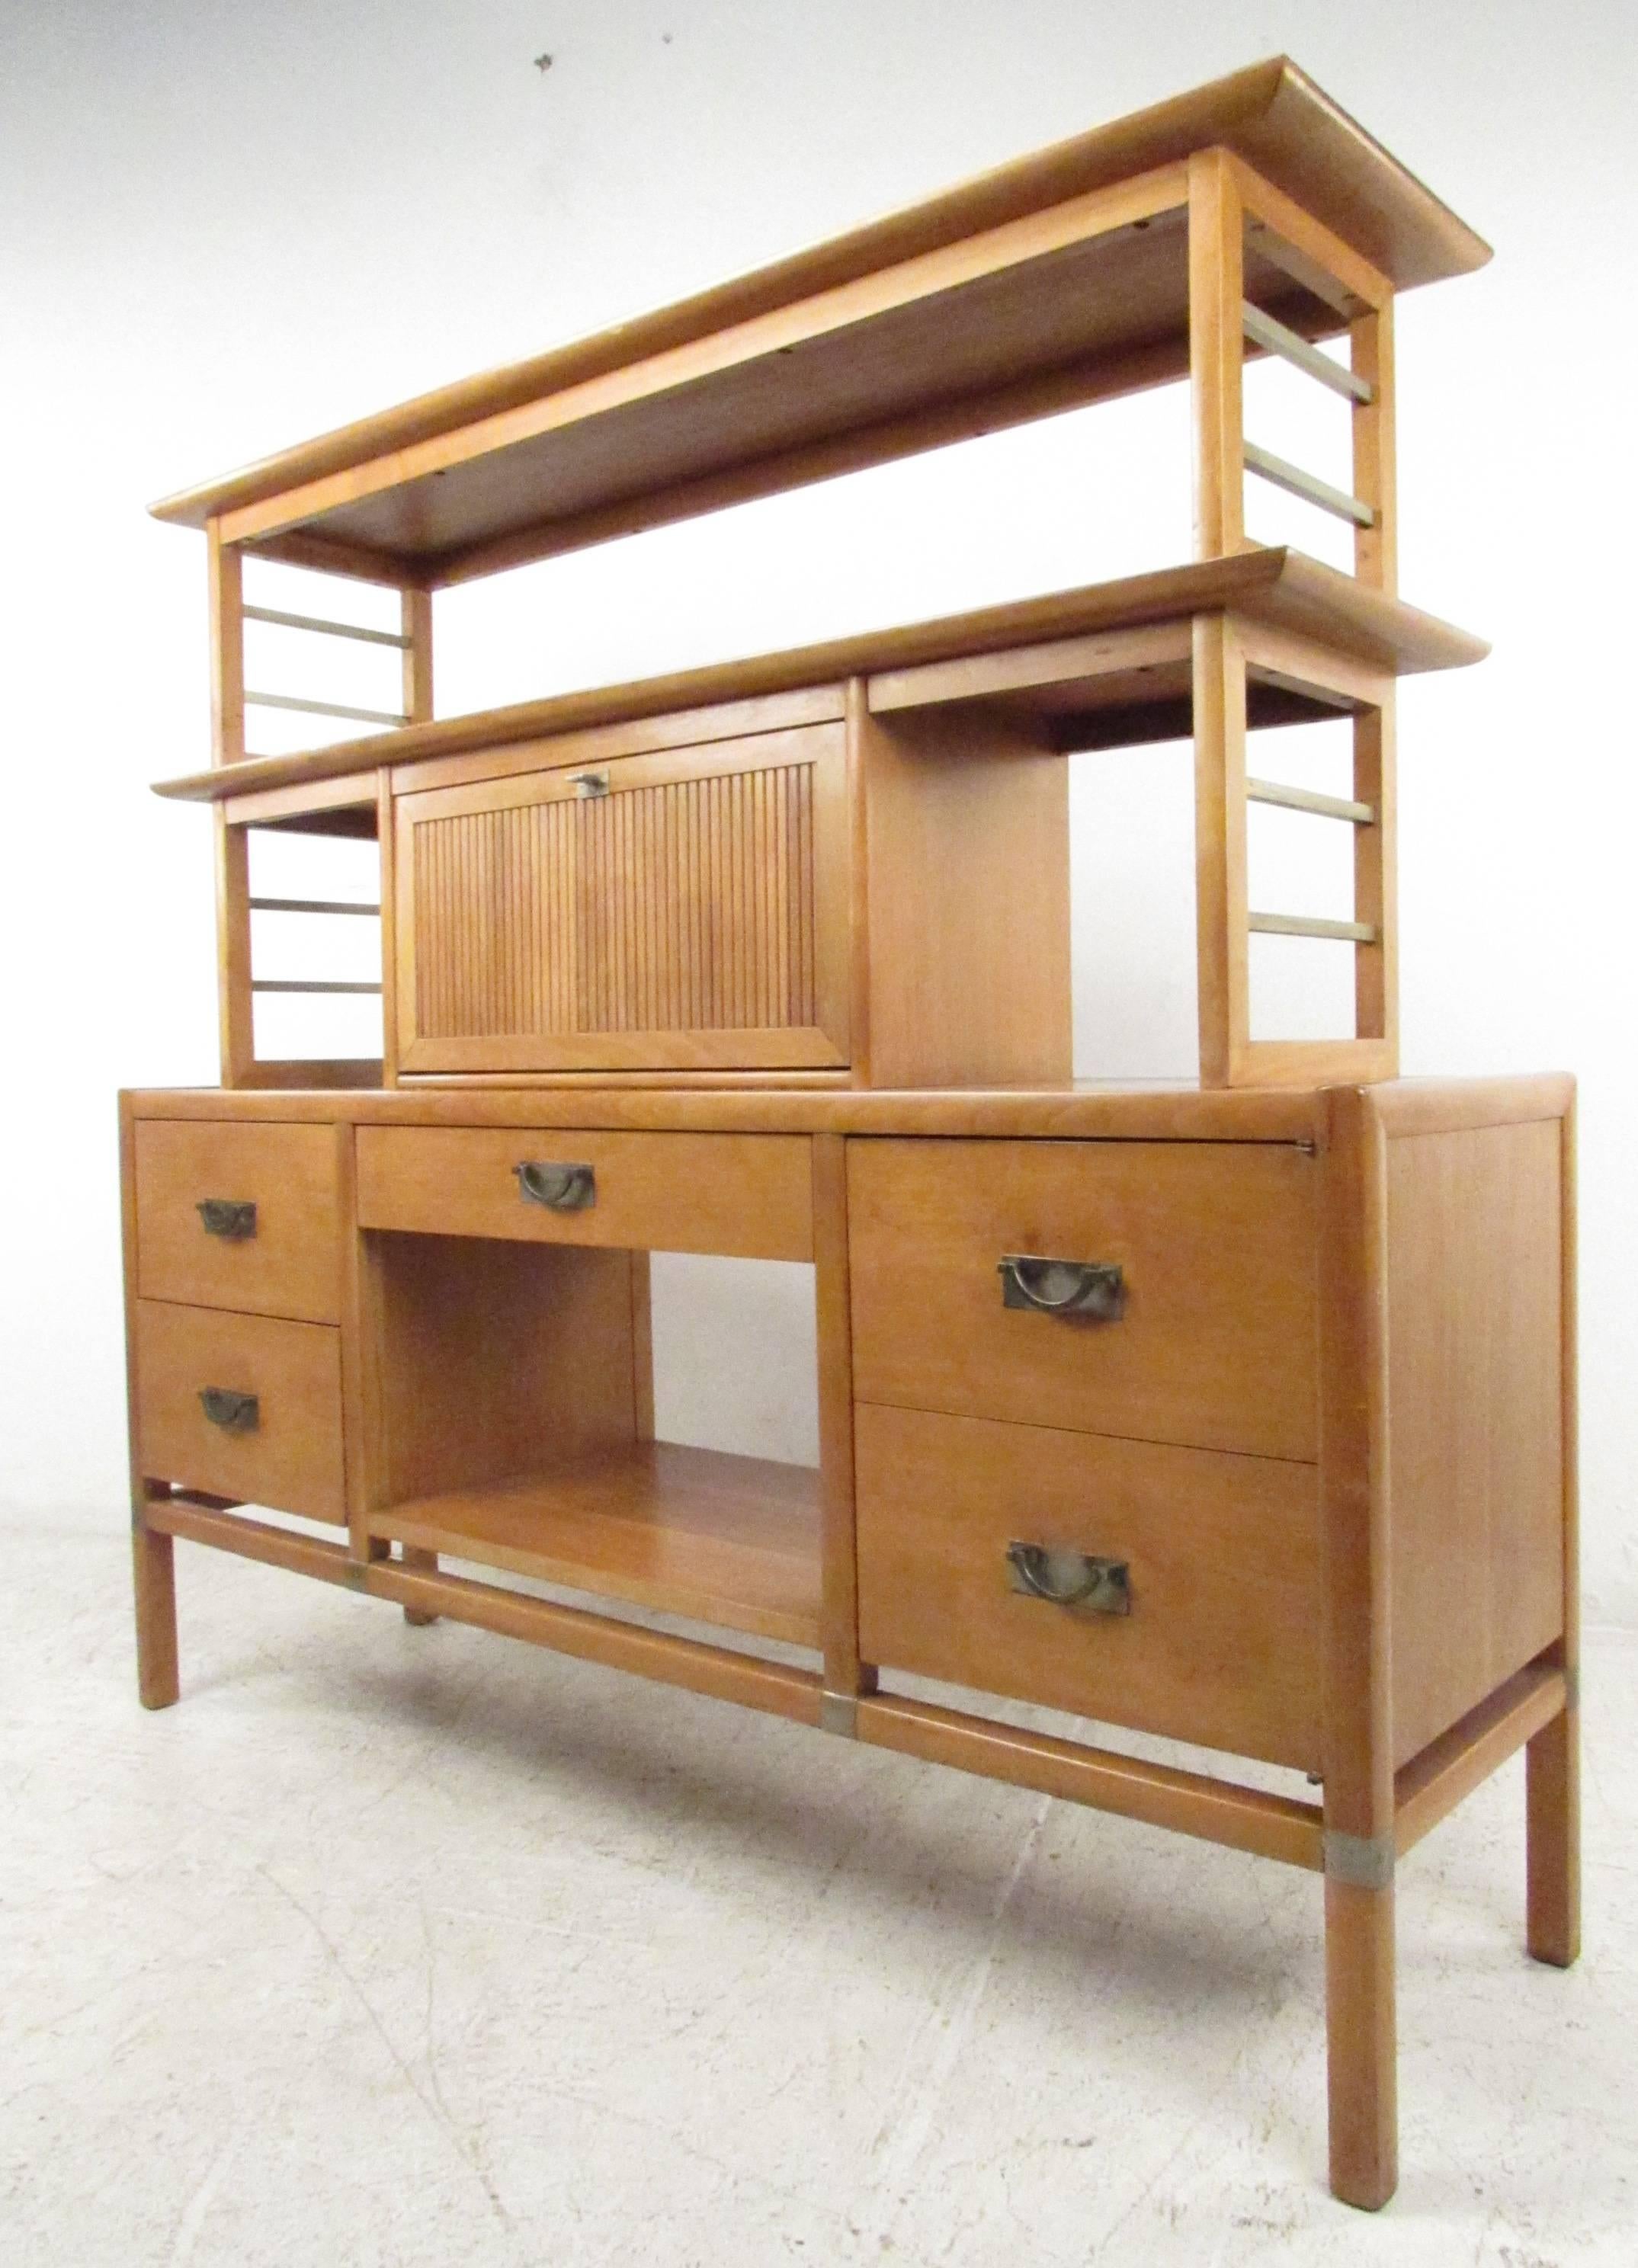 Unique desk or bookcase wall unit with drop down writing surface, multiple storage drawers, with open shelf space. Can be used as a desk, a server/sideboard or as a service station in a restaurant. Please confirm item location (NY or NJ) with